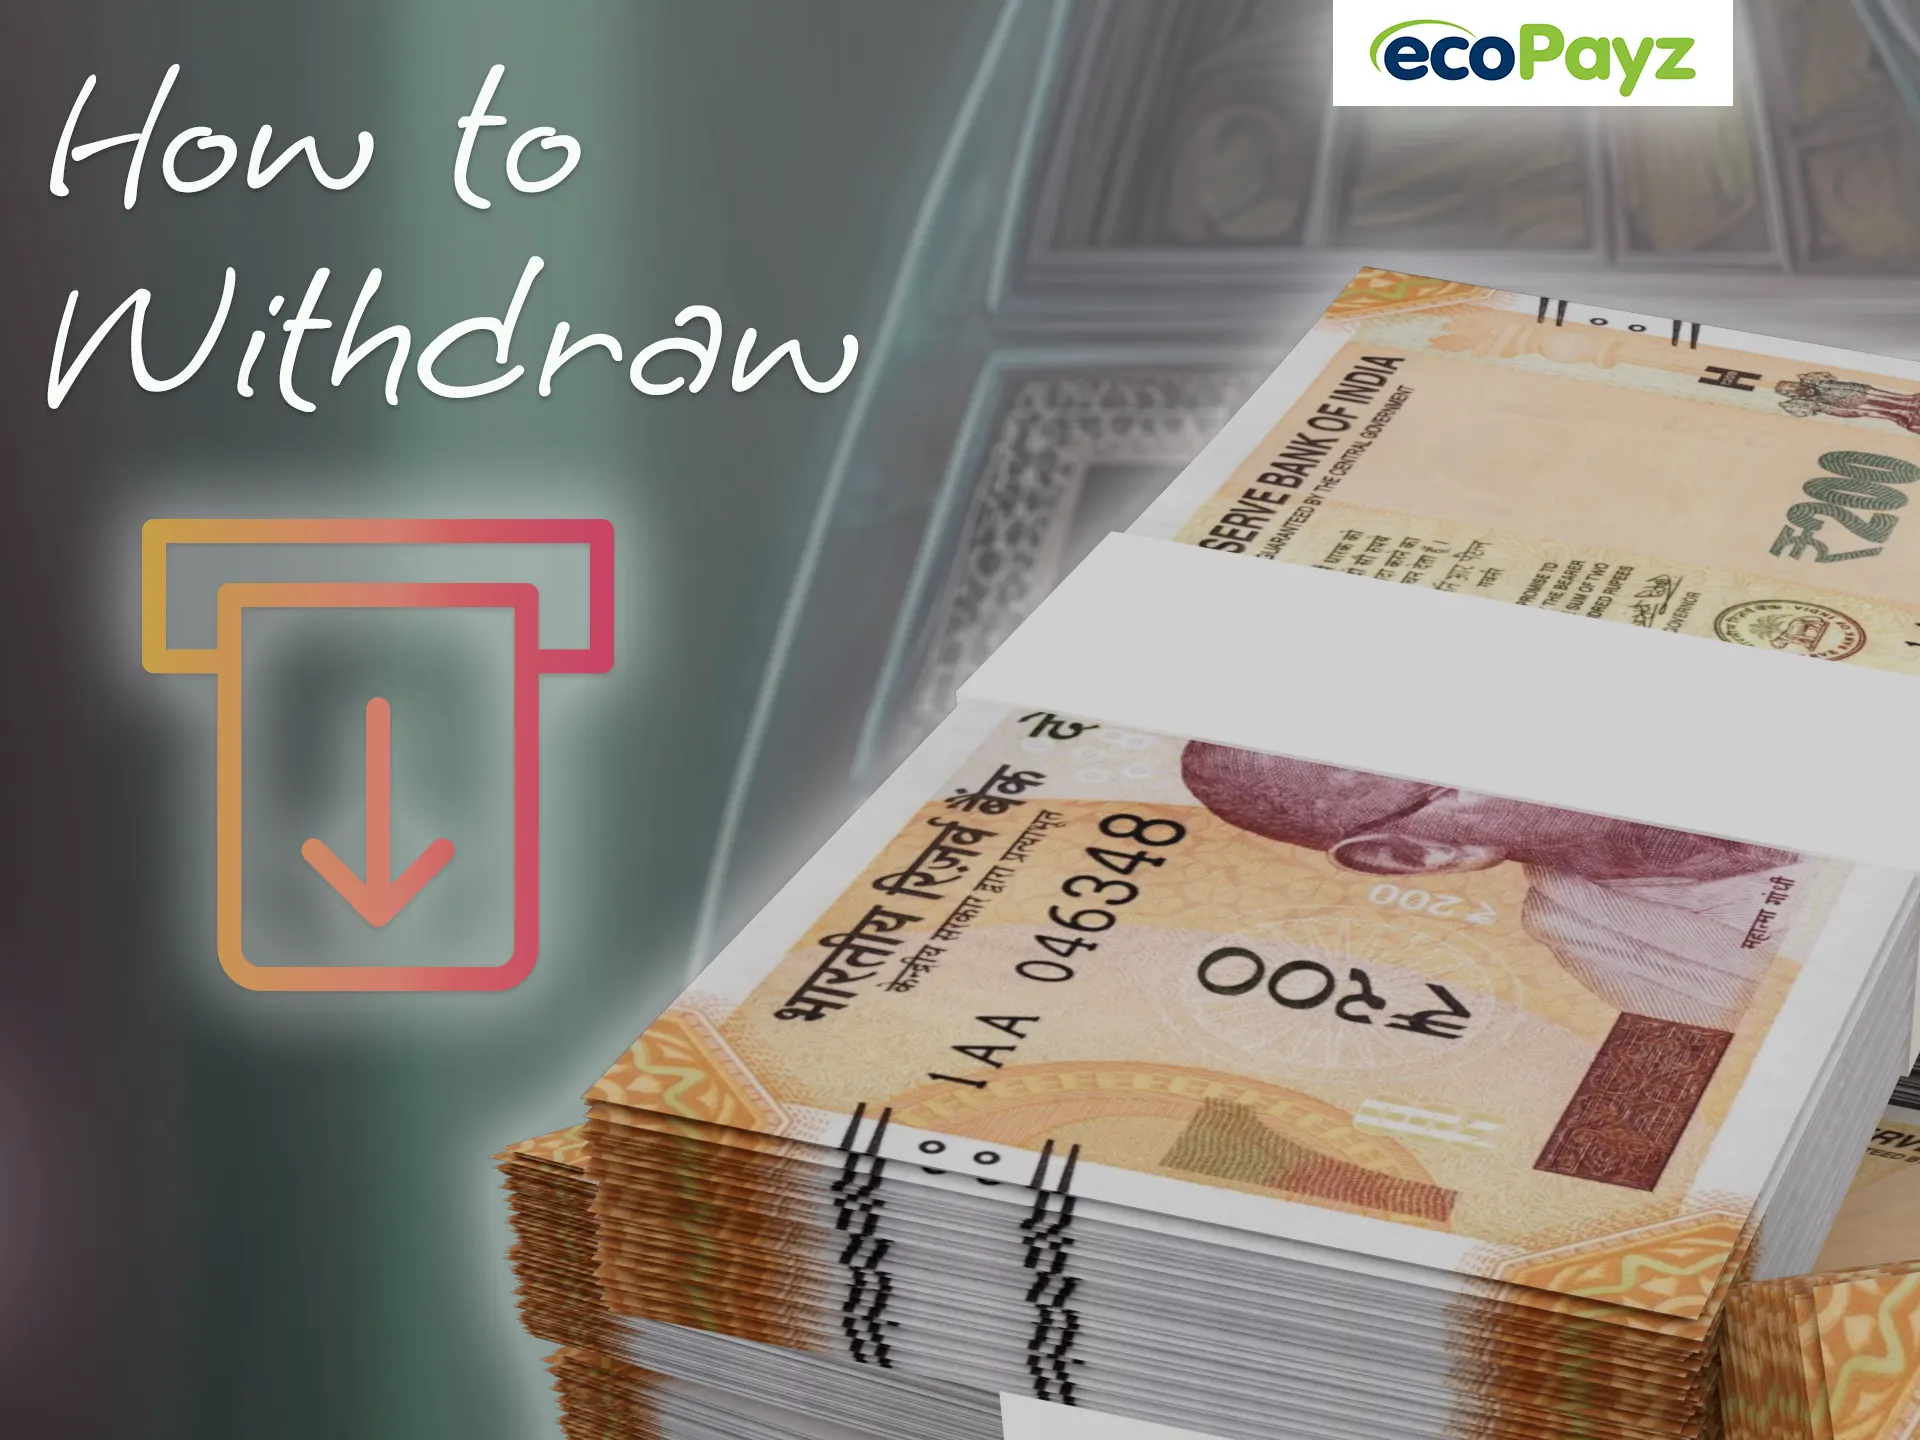 Withdraw money from your gaming account using the ecoPayz payment system.